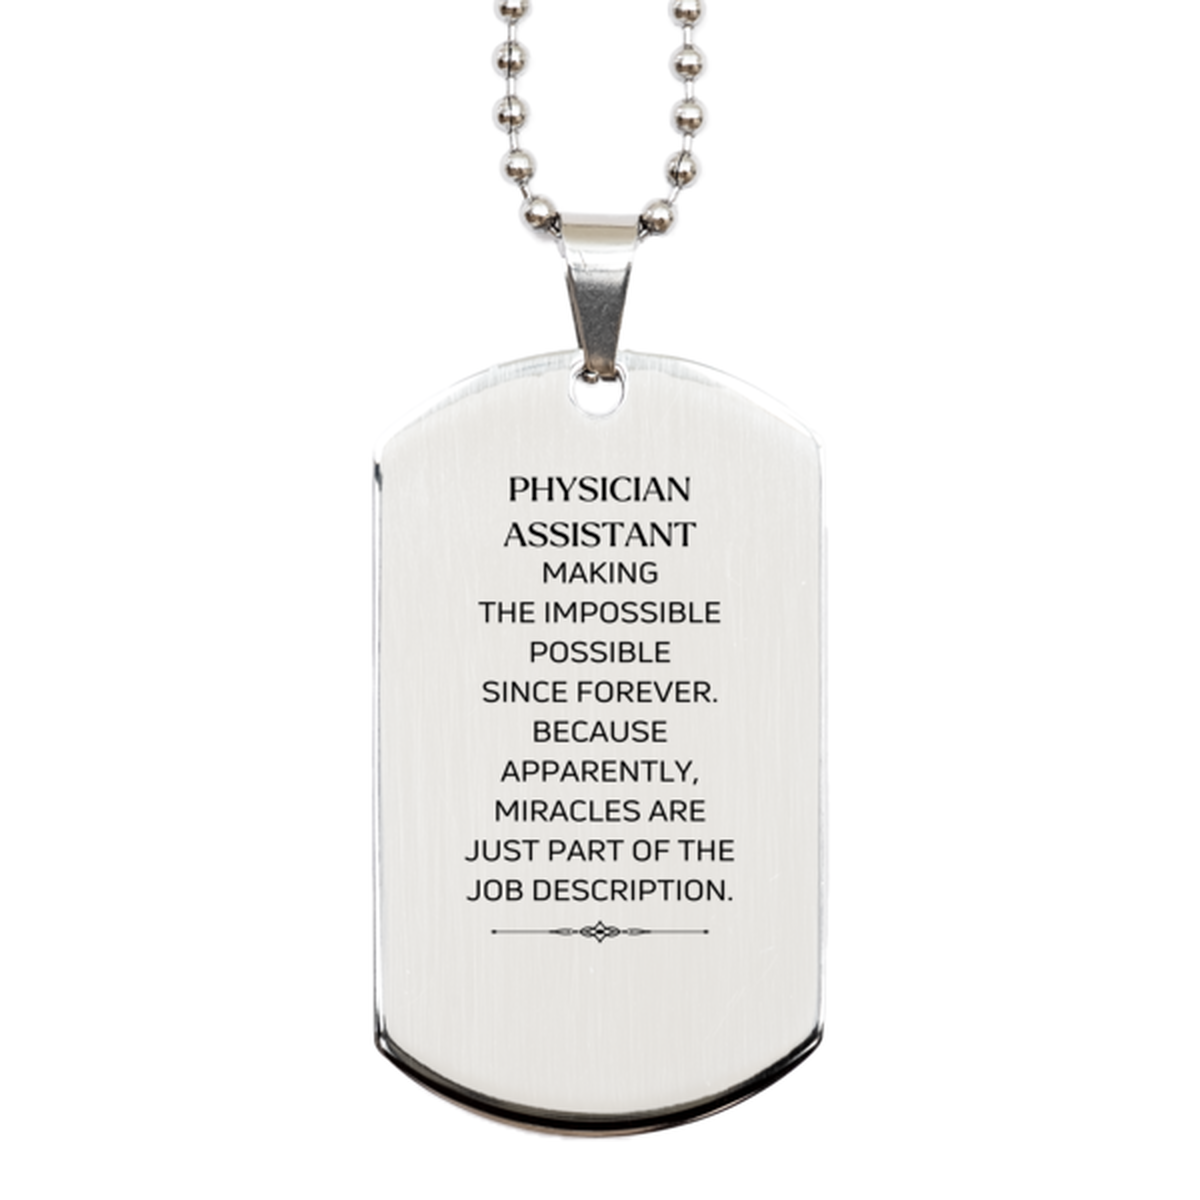 Funny Physician Assistant Gifts, Miracles are just part of the job description, Inspirational Birthday Silver Dog Tag For Physician Assistant, Men, Women, Coworkers, Friends, Boss